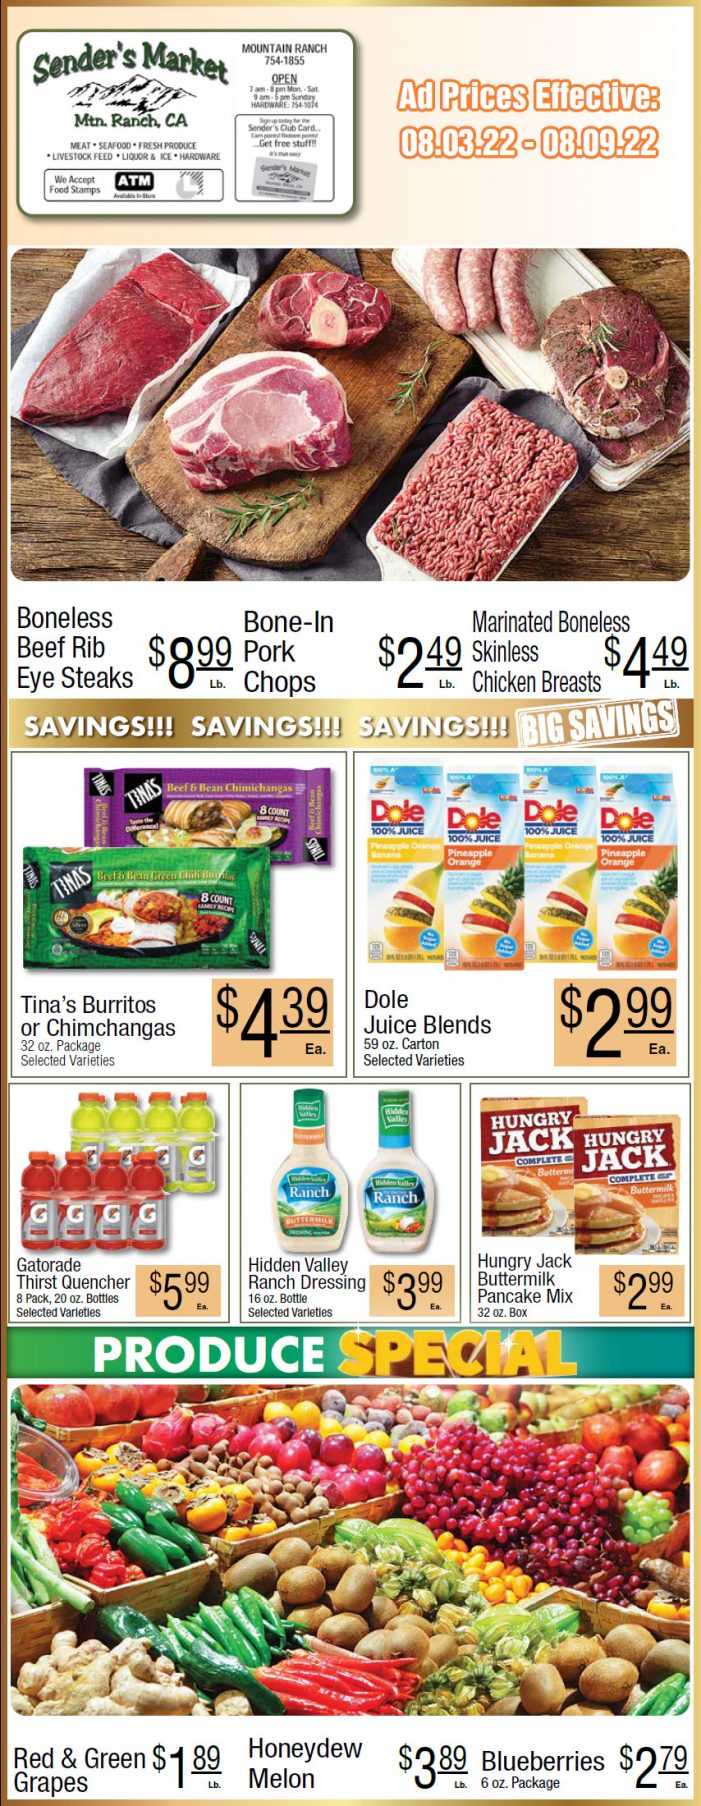 Sender’s Market Weekly Ad & Grocery Specials Through August 9th!  Shop Local & Save!